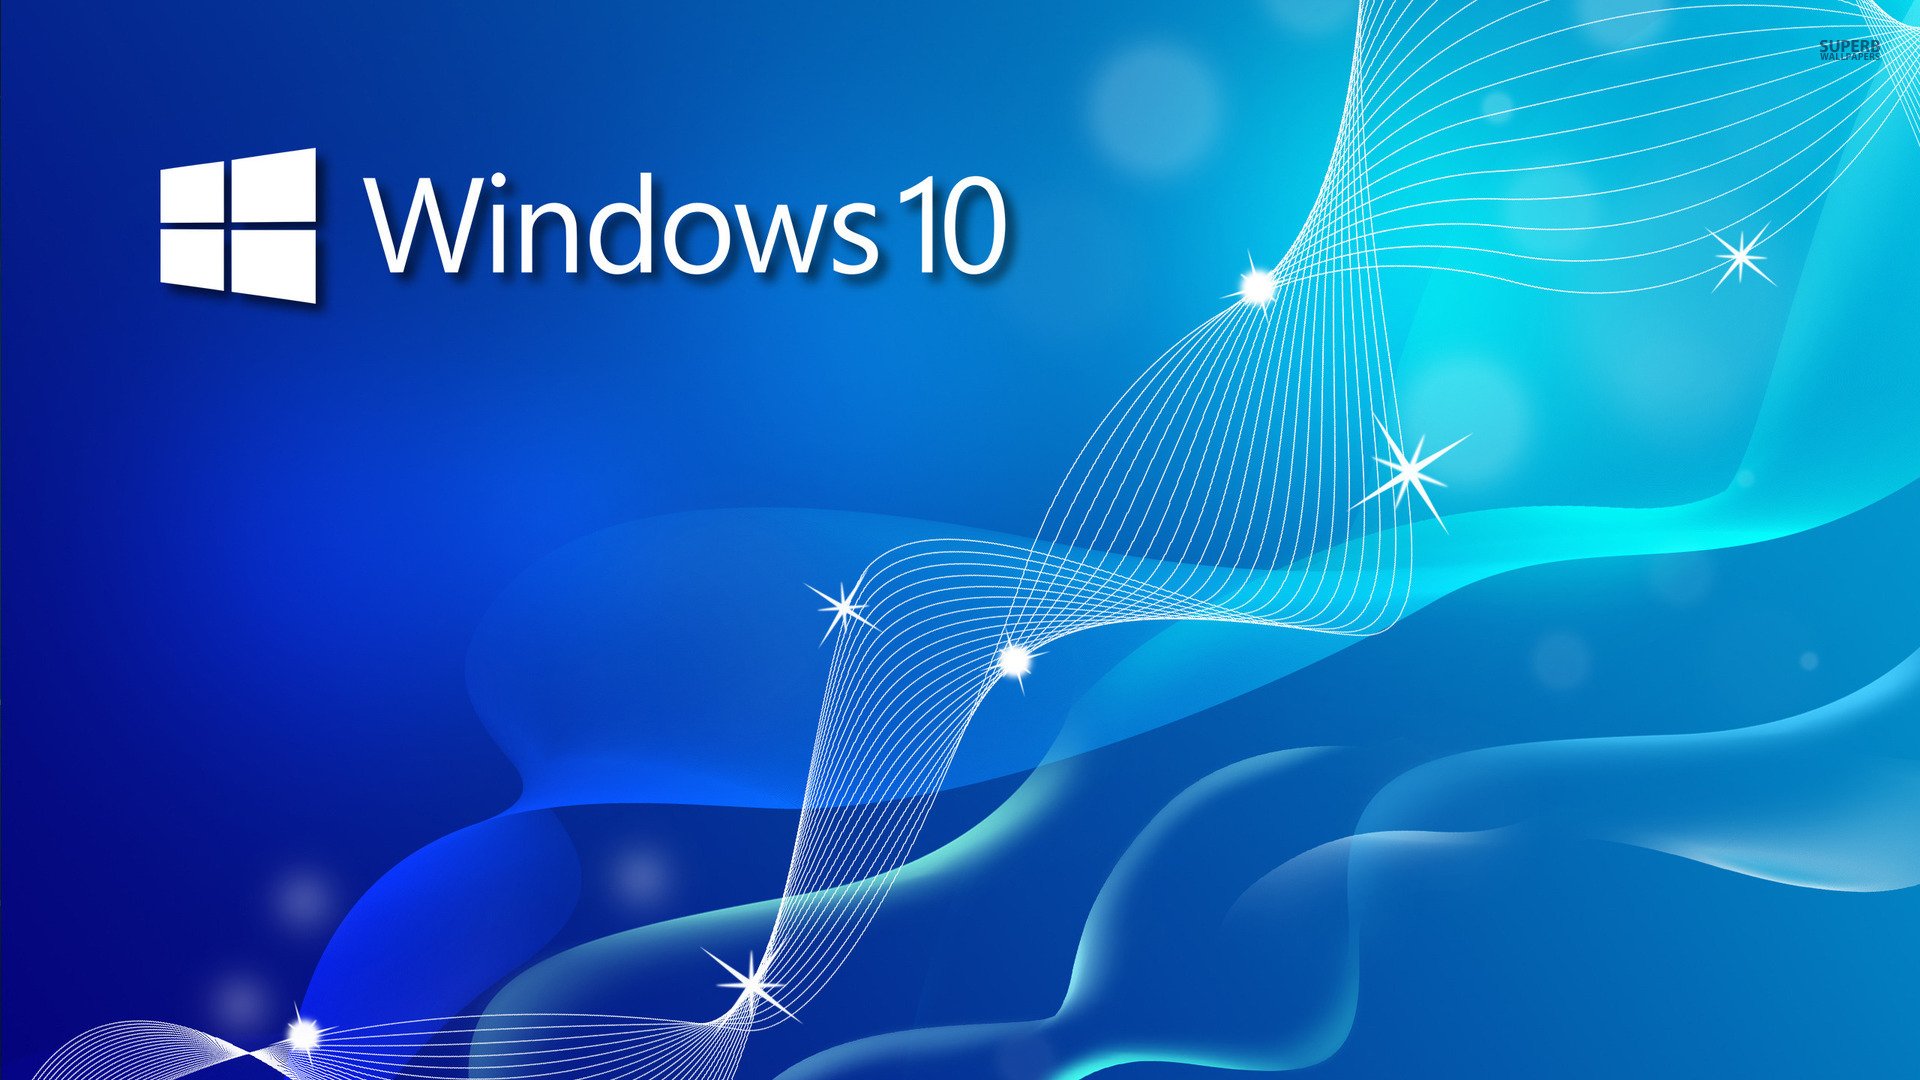 Windows 10 Wallpaper Download Full HD Pictures 1920x1080